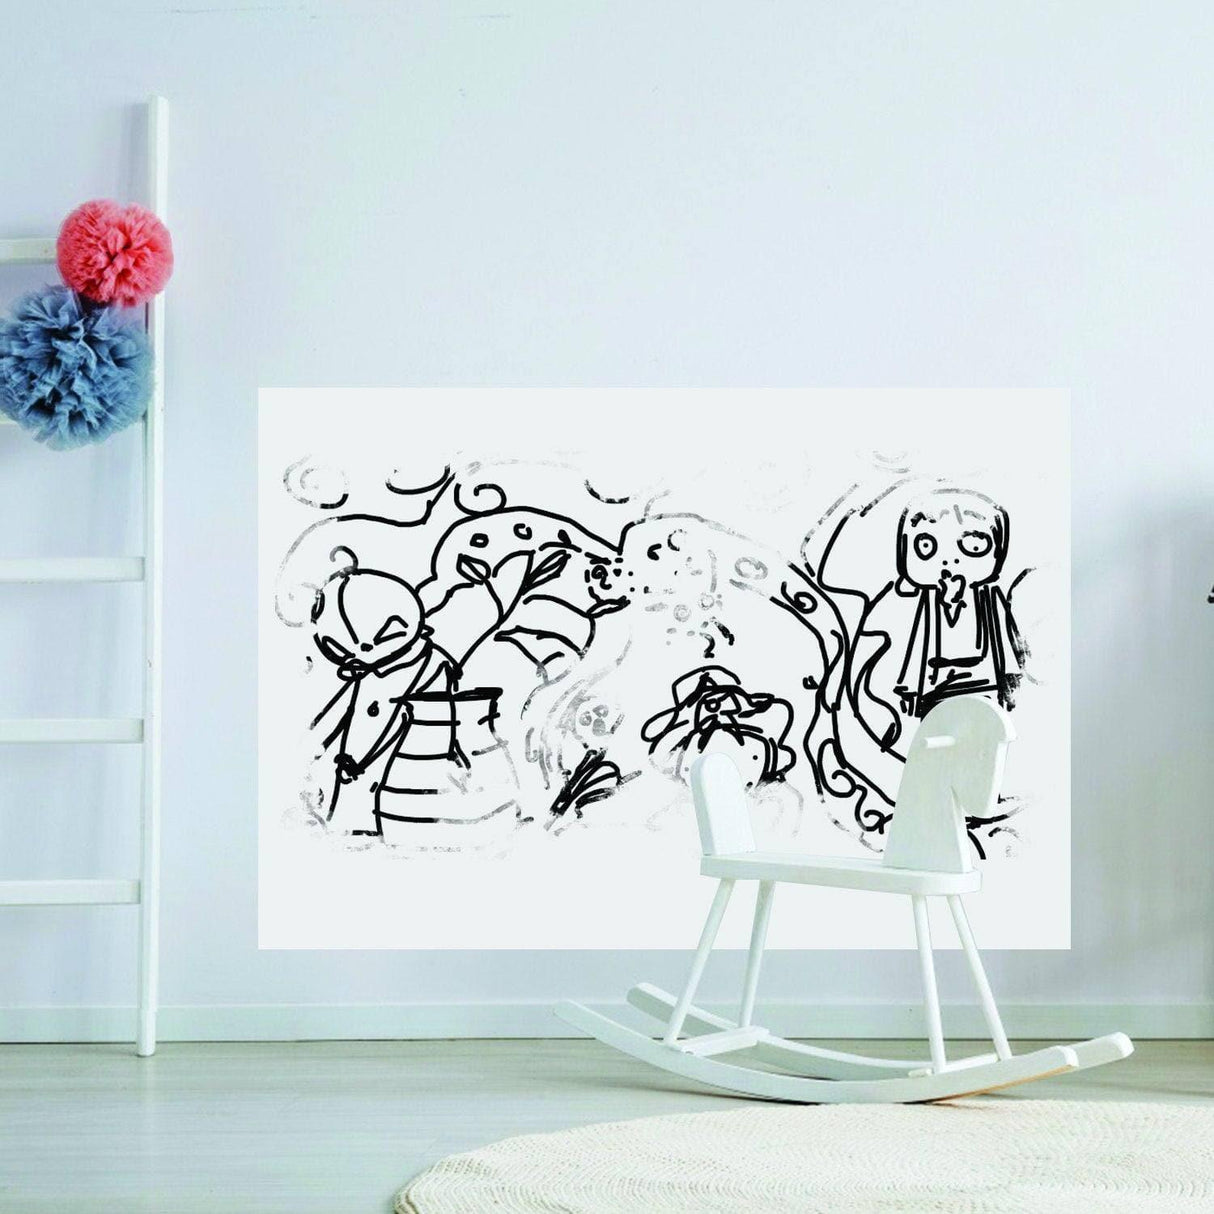 Chalkboard & Dry Erase Wall Decals & Stickers